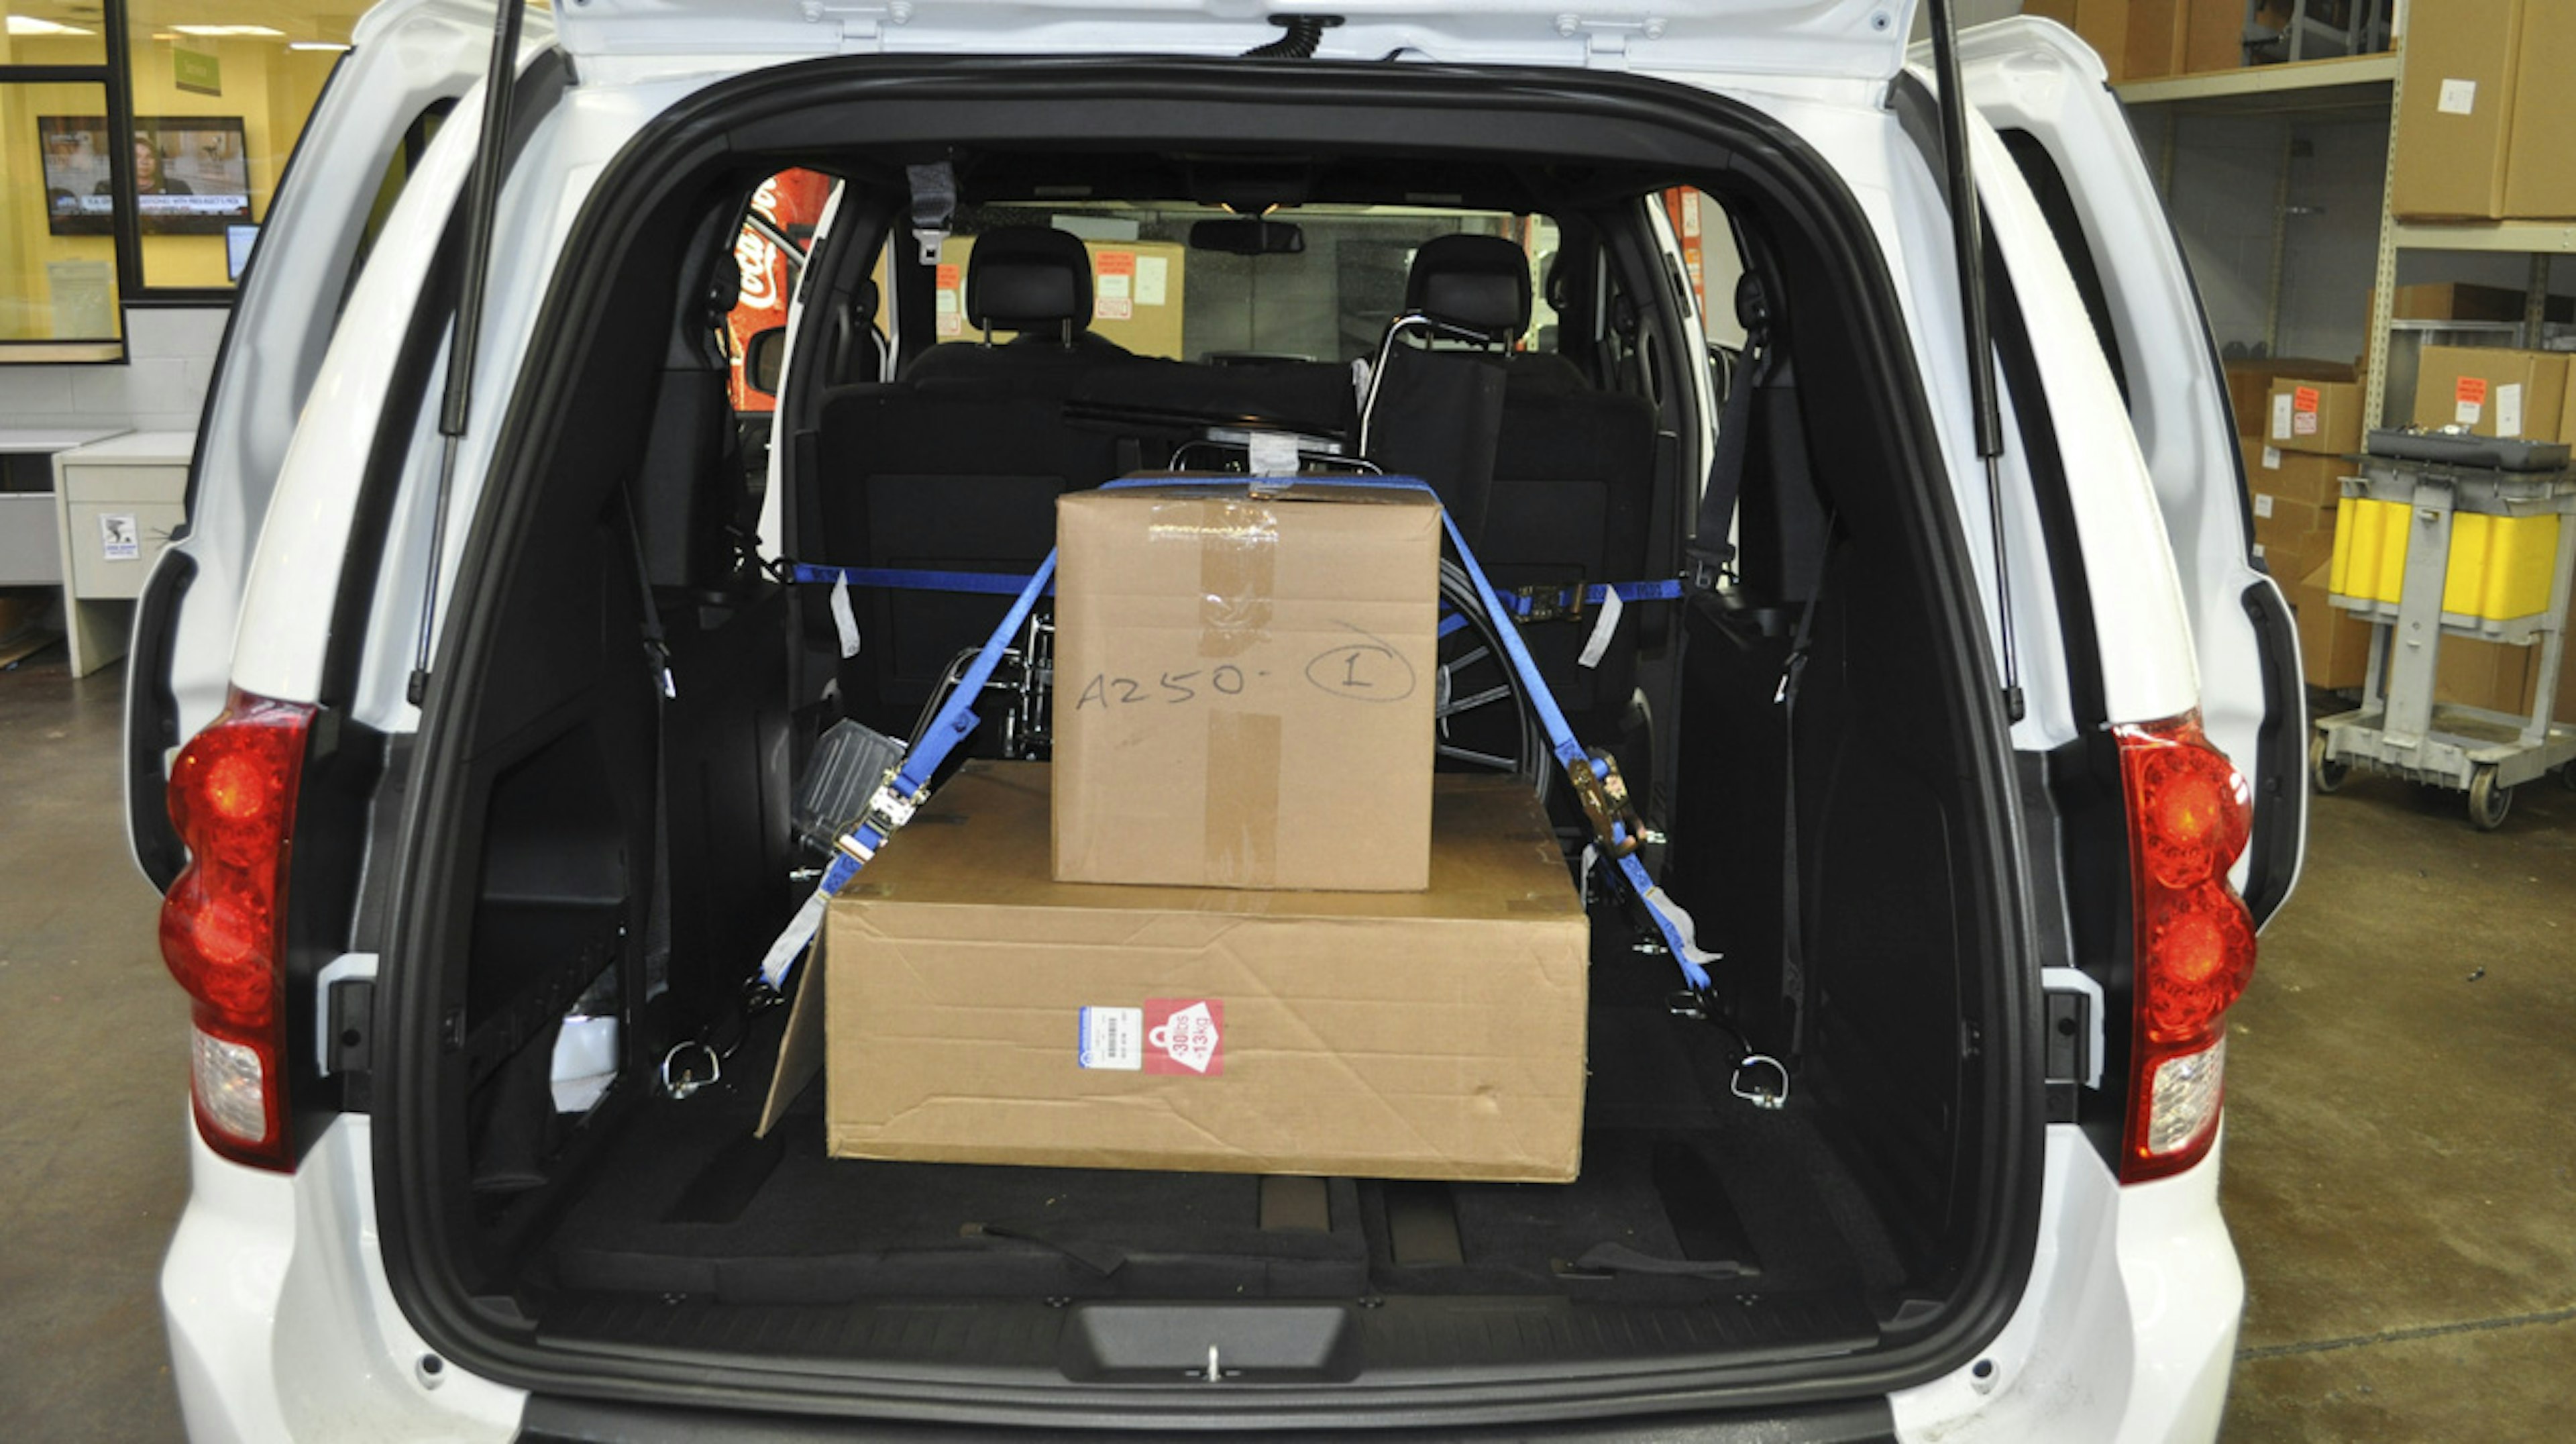 delivery van with room for packages